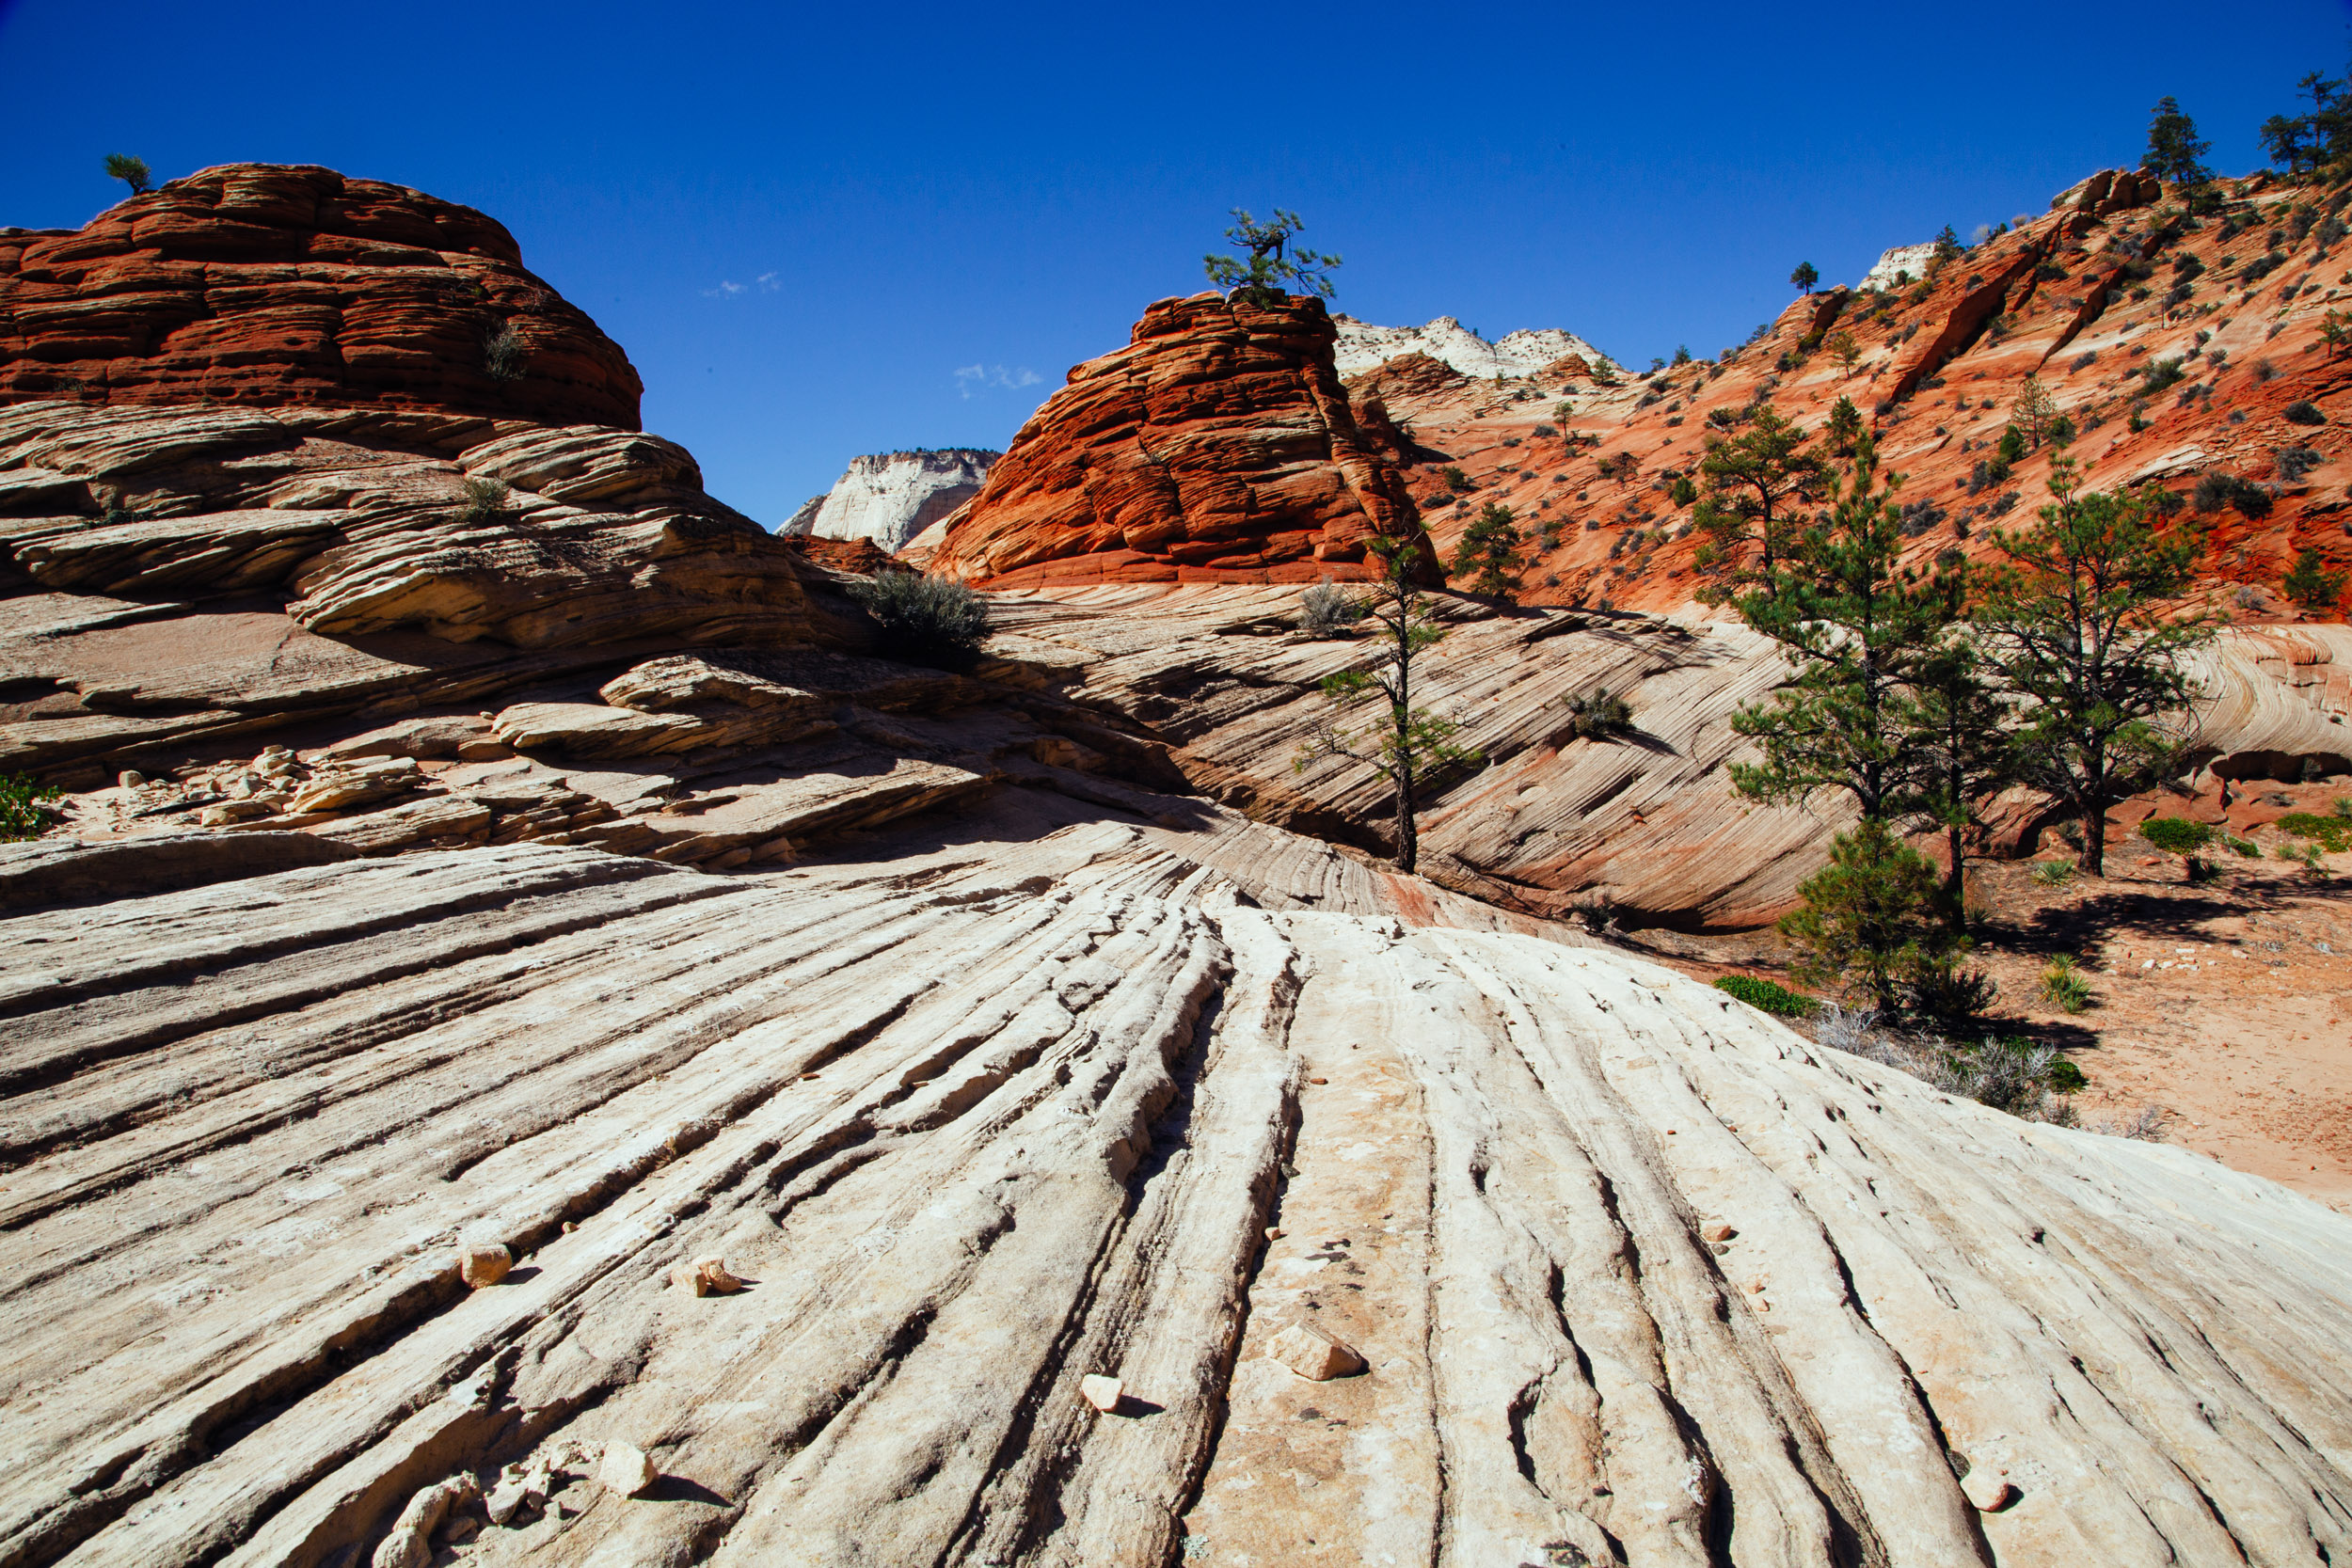 Layers and layers of rock sit atop each other high above Zion Canyon